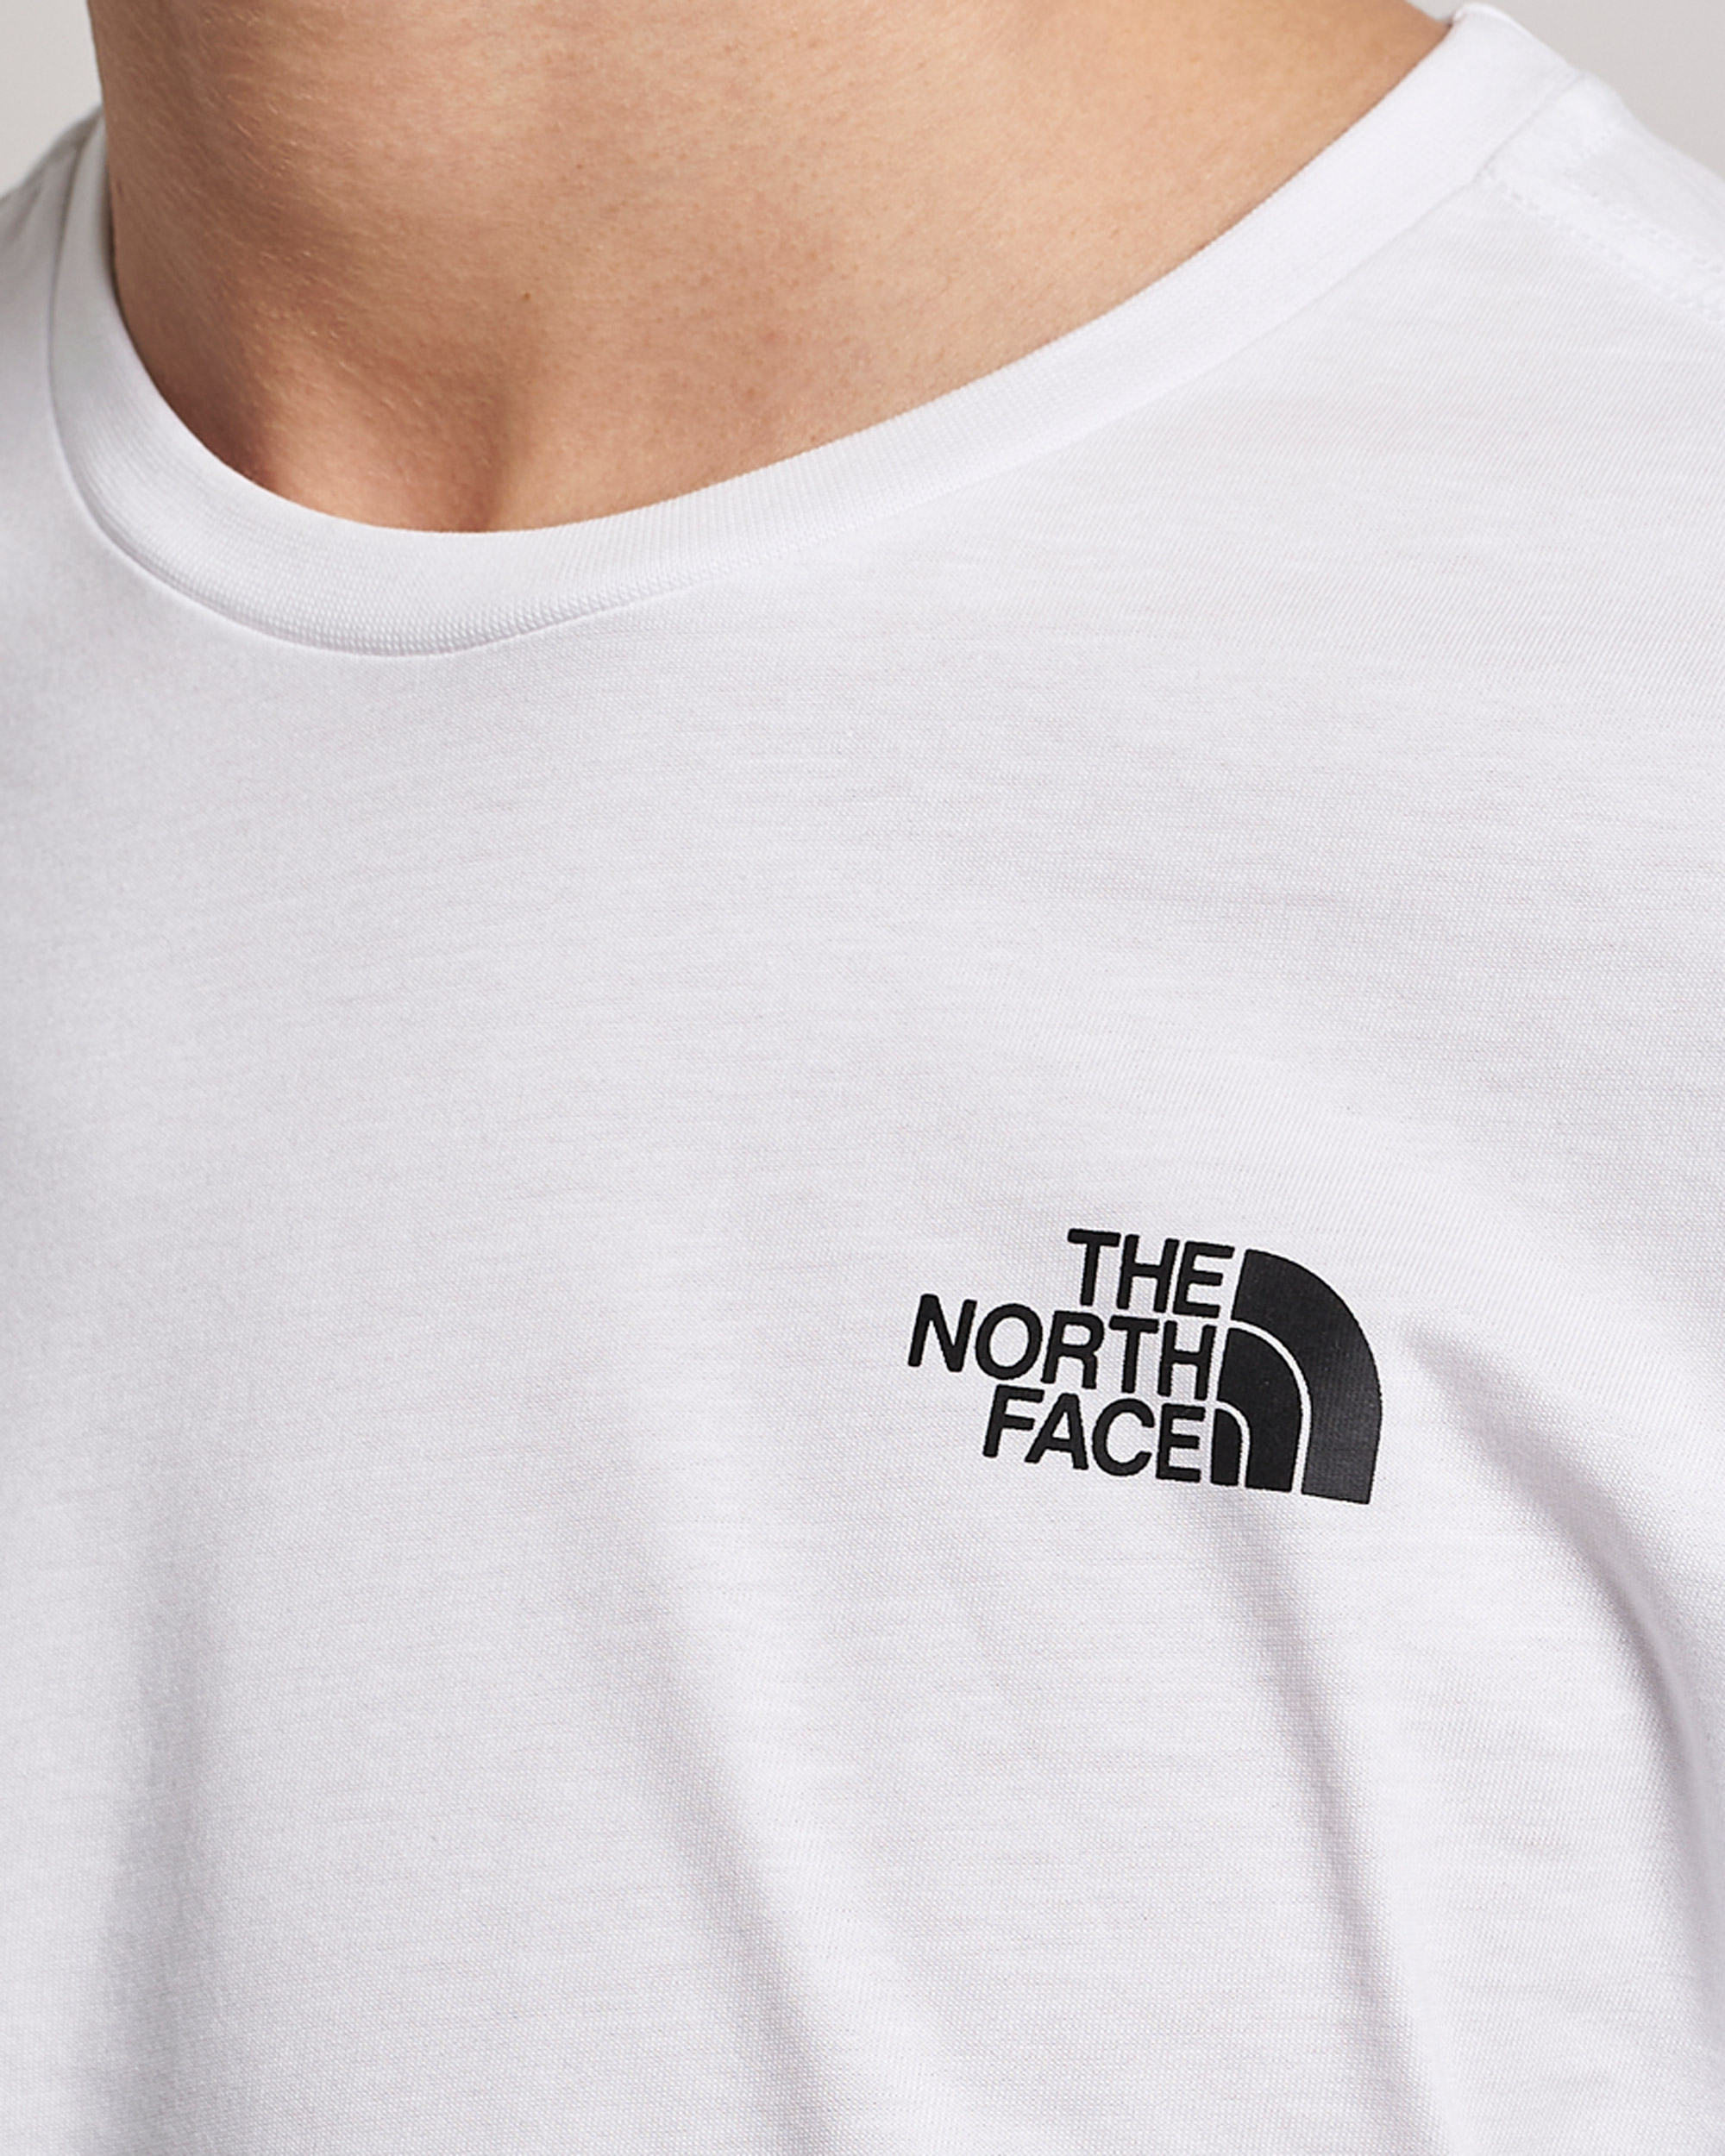 The North Face Long Sleeve Easy T-Shirt White at CareOfCarl.com